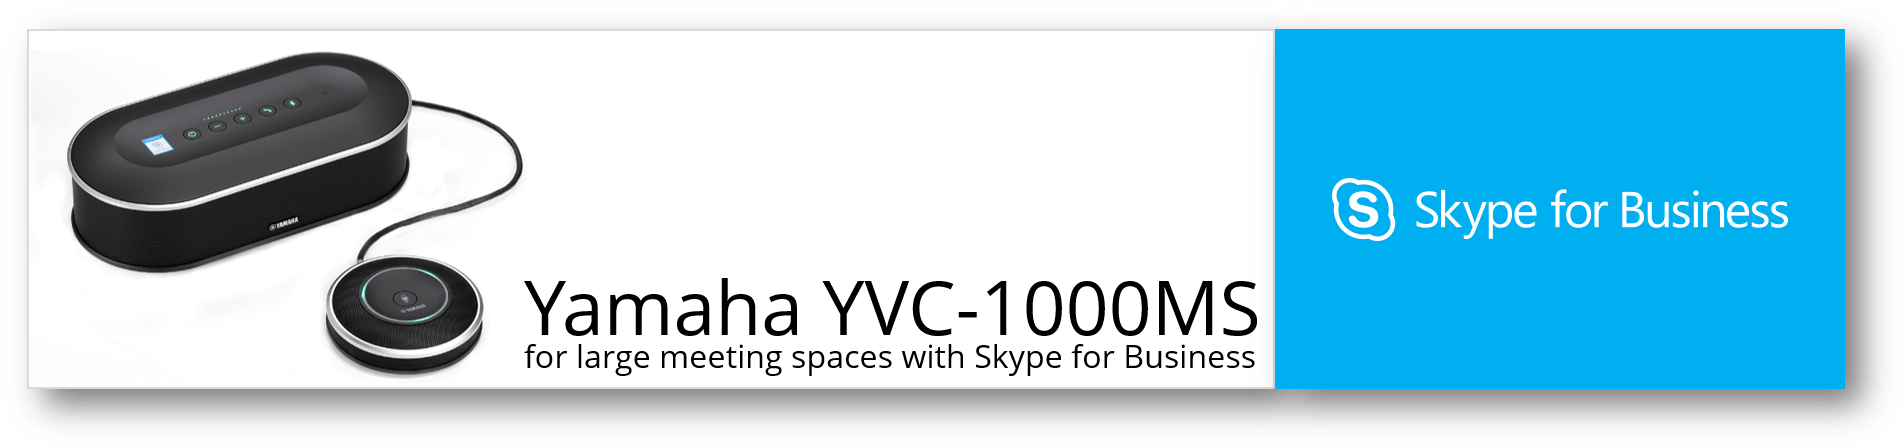 Introducing Yvc-1000ms For Large Meeting Spaces With - Yamaha Group Yamaha Yvc-1000ms Speakerphone Solution (1915x457)